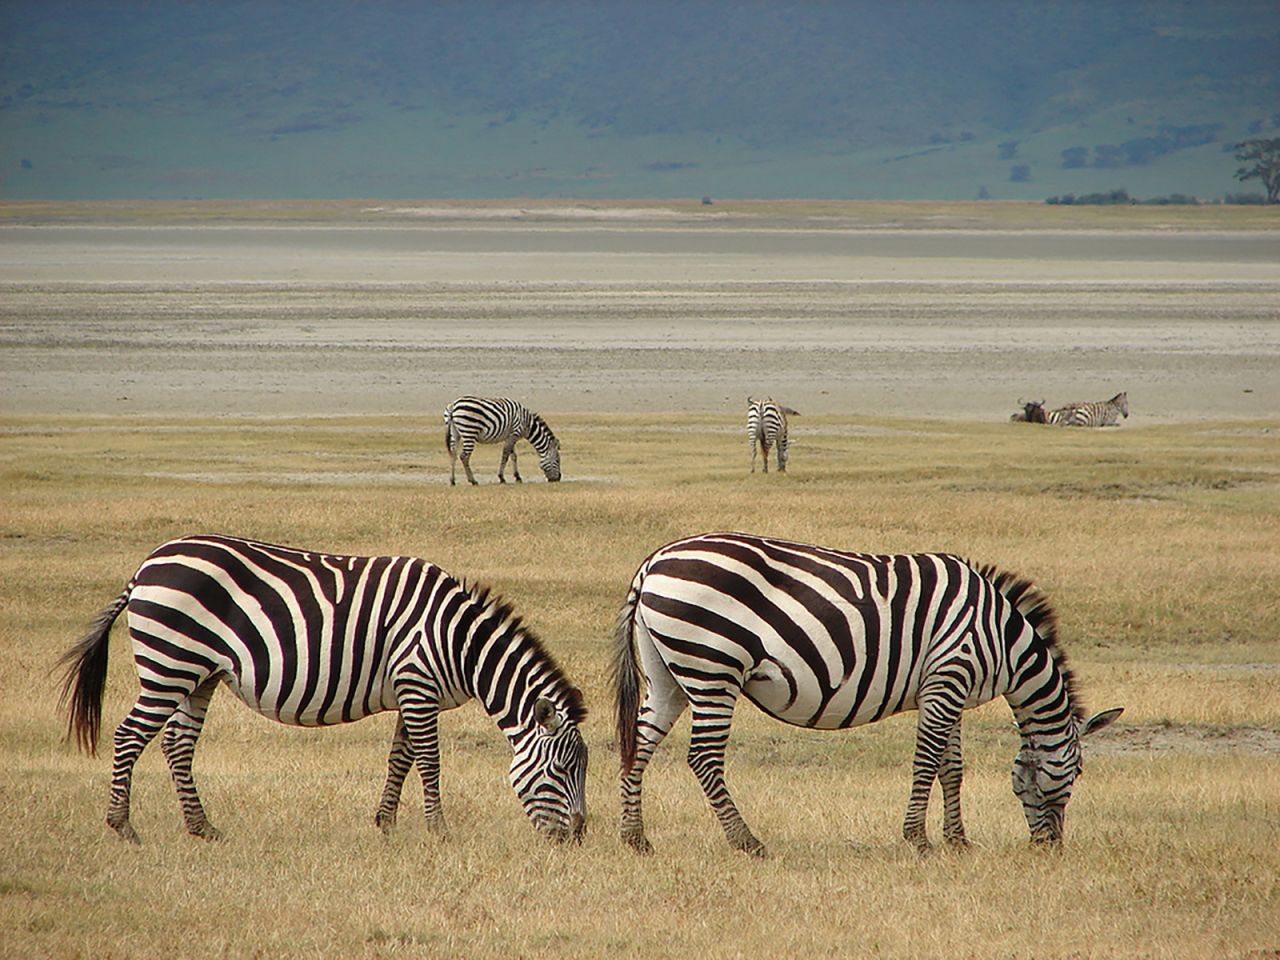 Located in northern Tanzania and spilling into nearby Kenya, where the conservation area is known as the Masai Mara, this iconic savannah hosts the annual migration of 2 million wildebeest, zebra and gazelle followed by their predators, in search of pasture and water. 